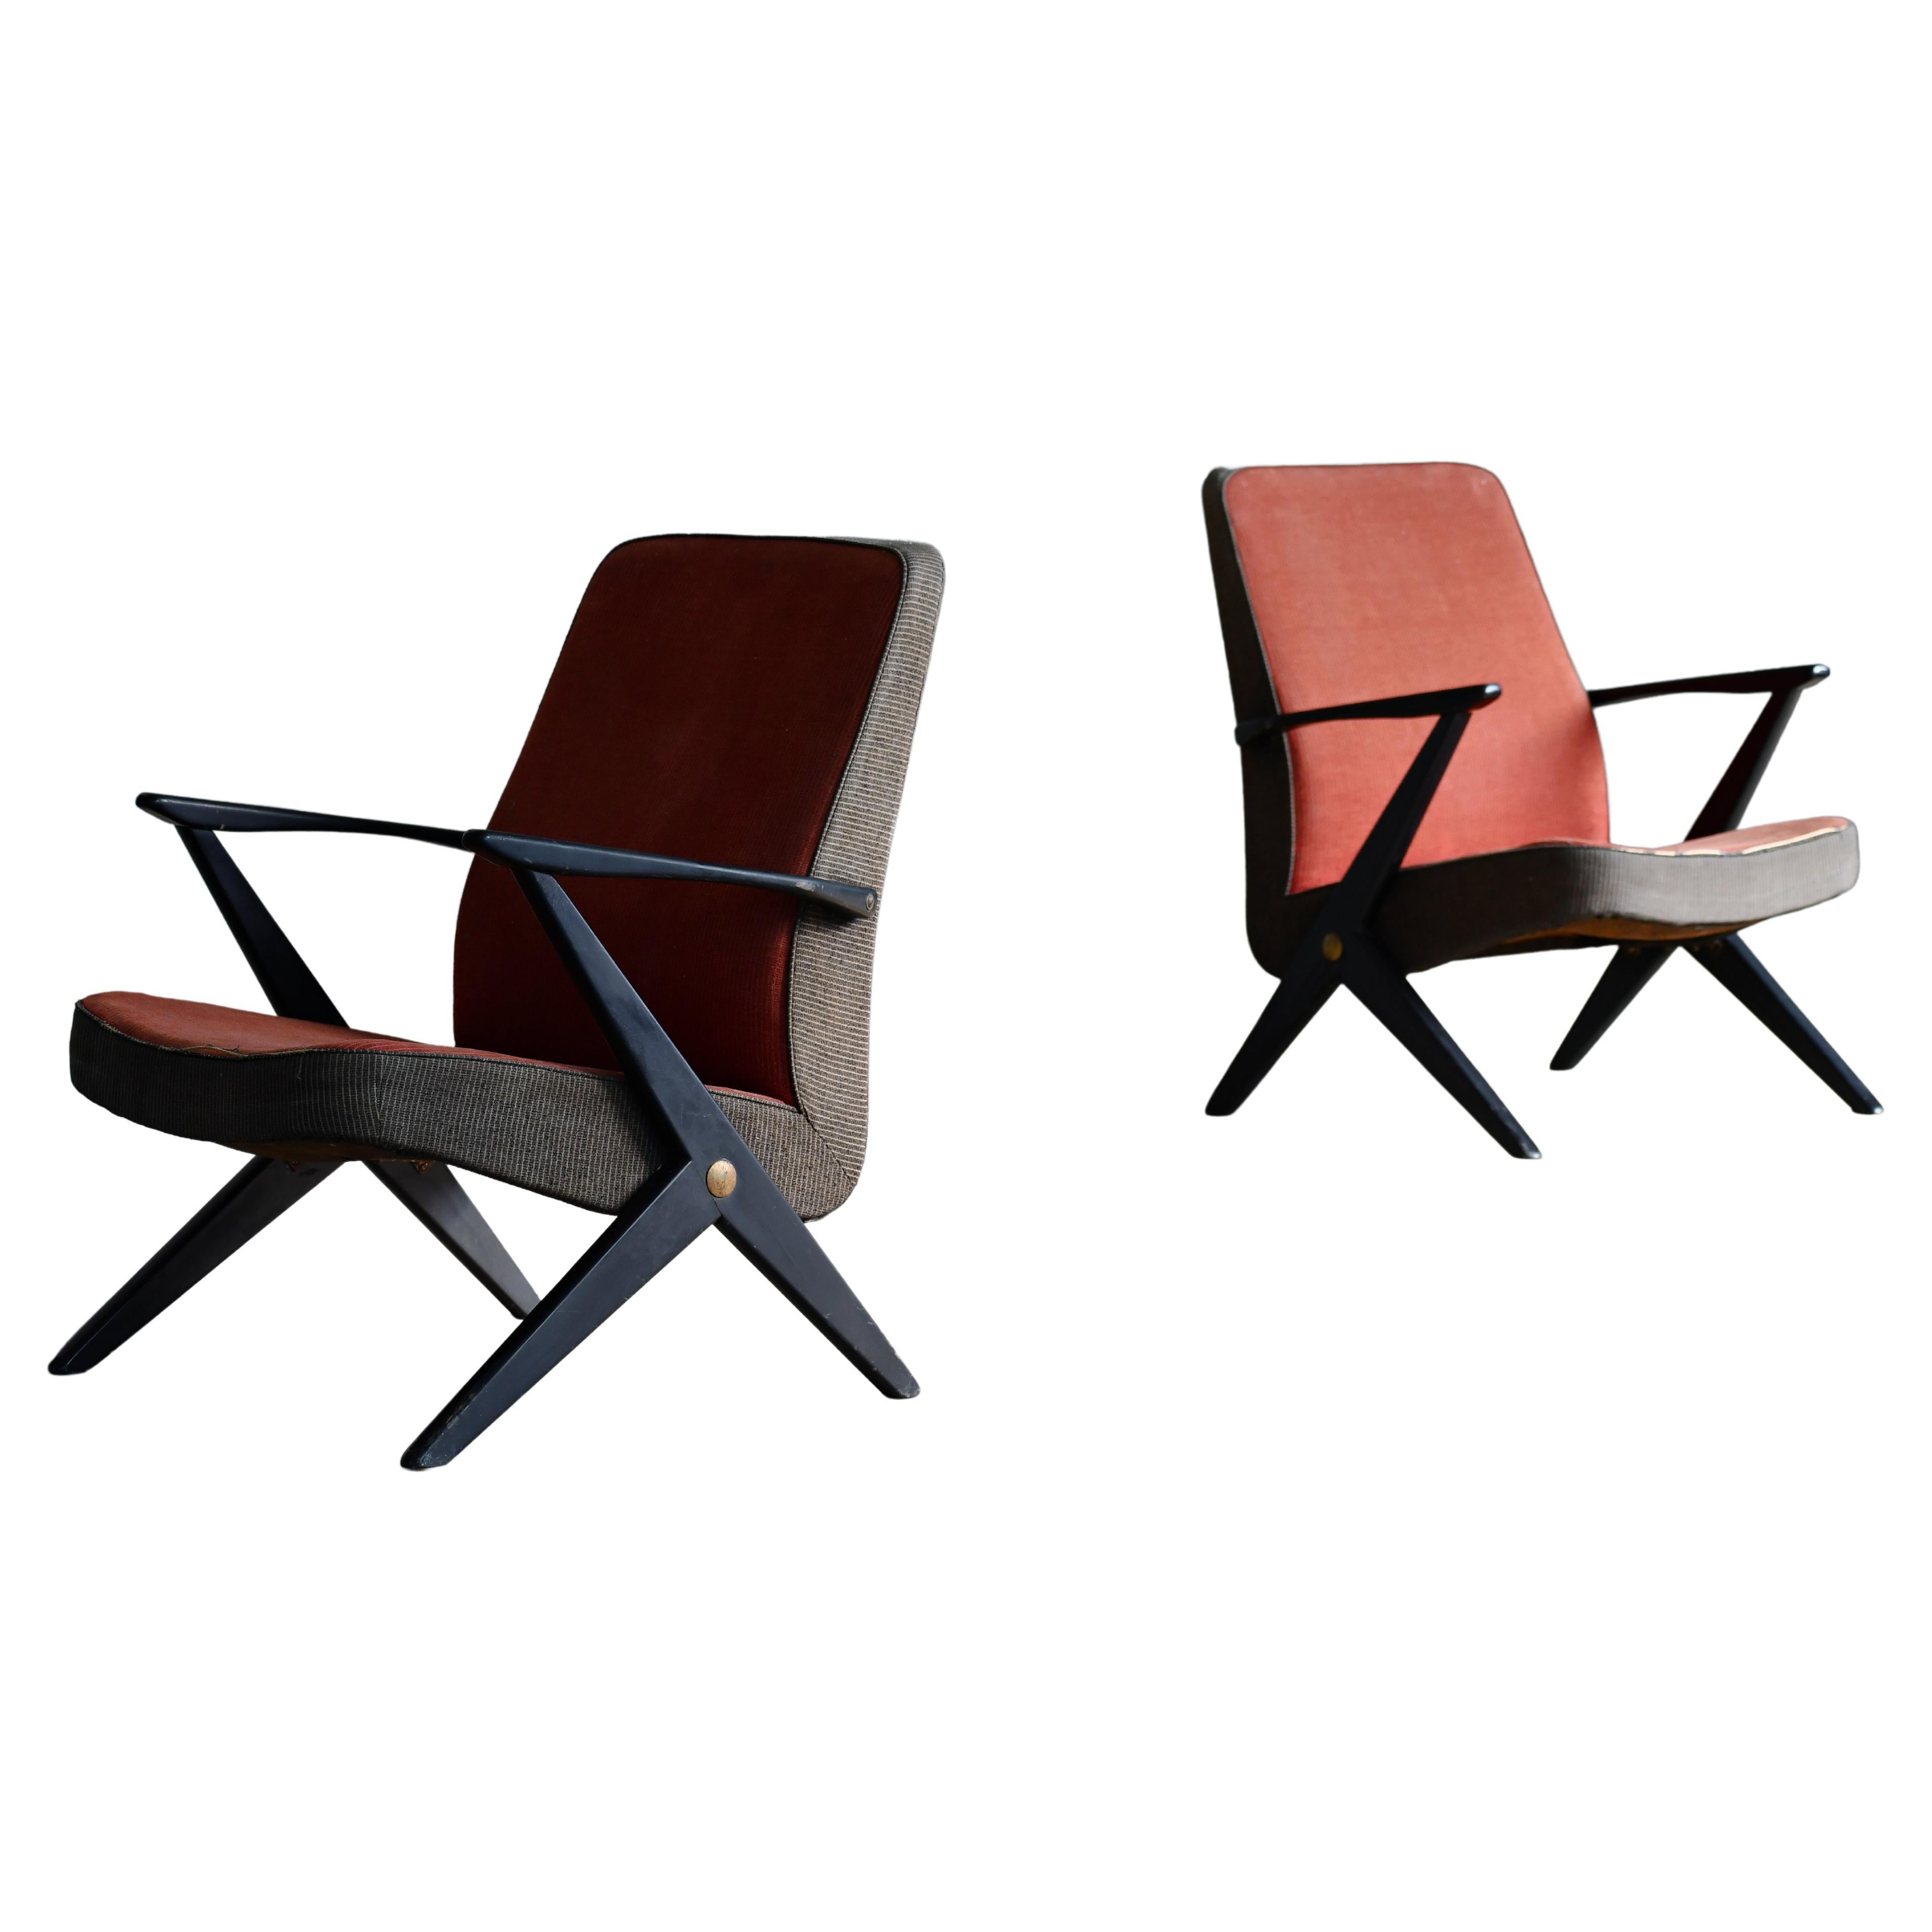 Pair of 1950s Easy Chairs by Bengt Ruda for Nordiska Kompagniet, Sweden For Sale